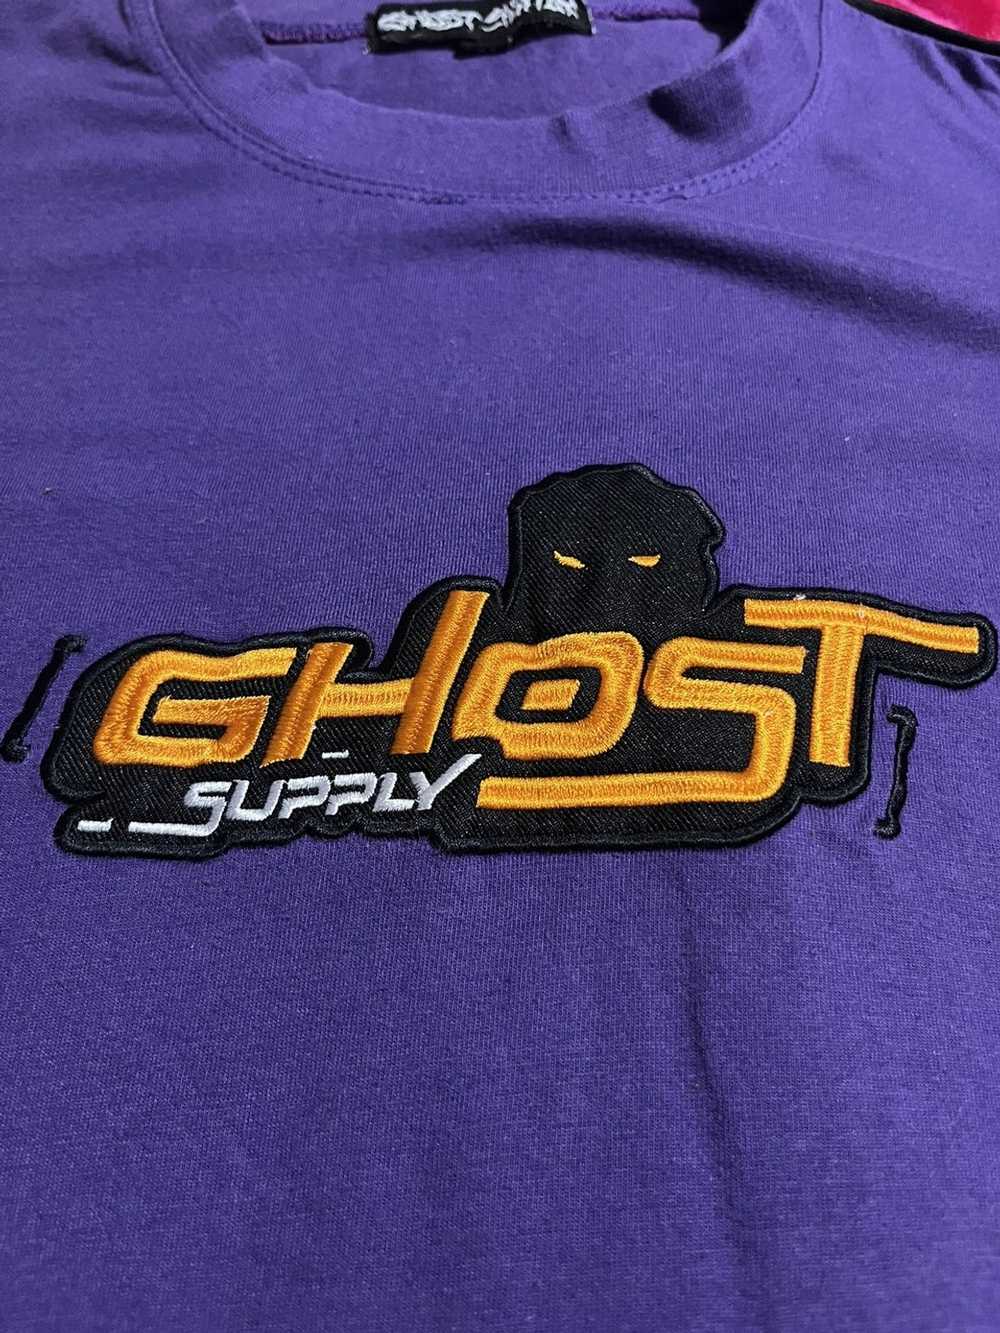 Ghost Supply purple ghost supply t-shirt - image 2